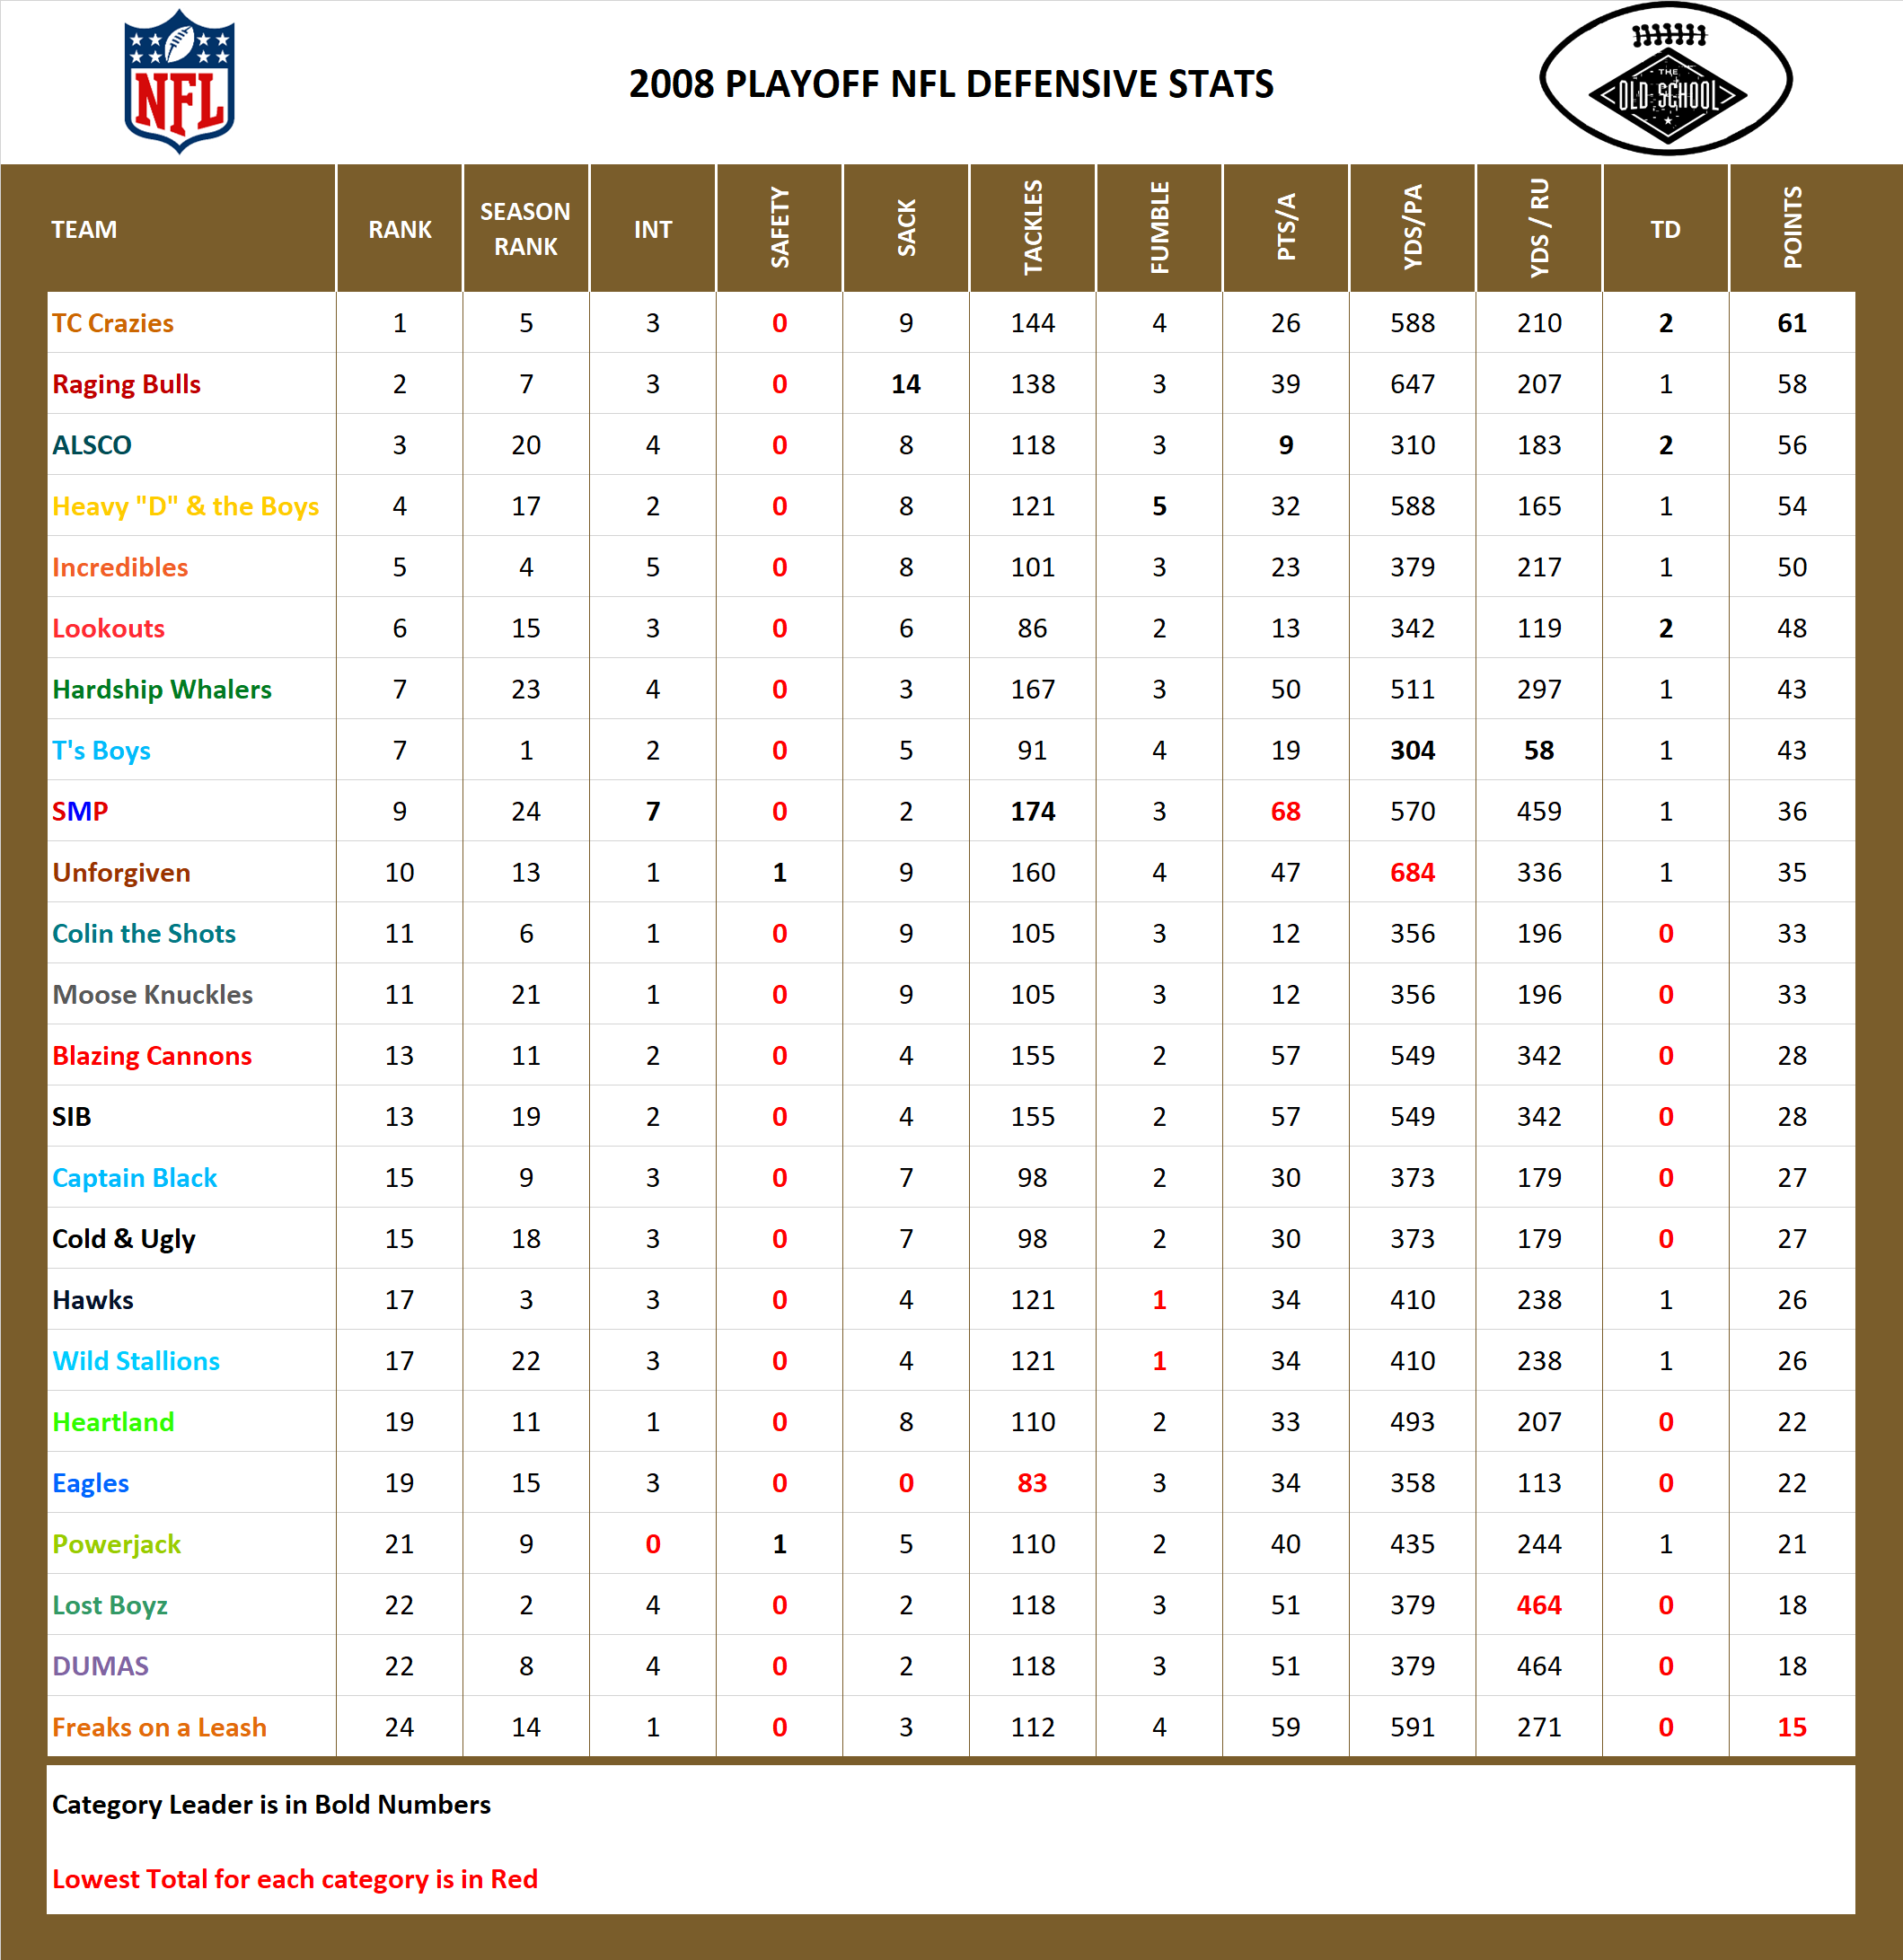 2008 National Football League Pool Playoff Defensive Stats